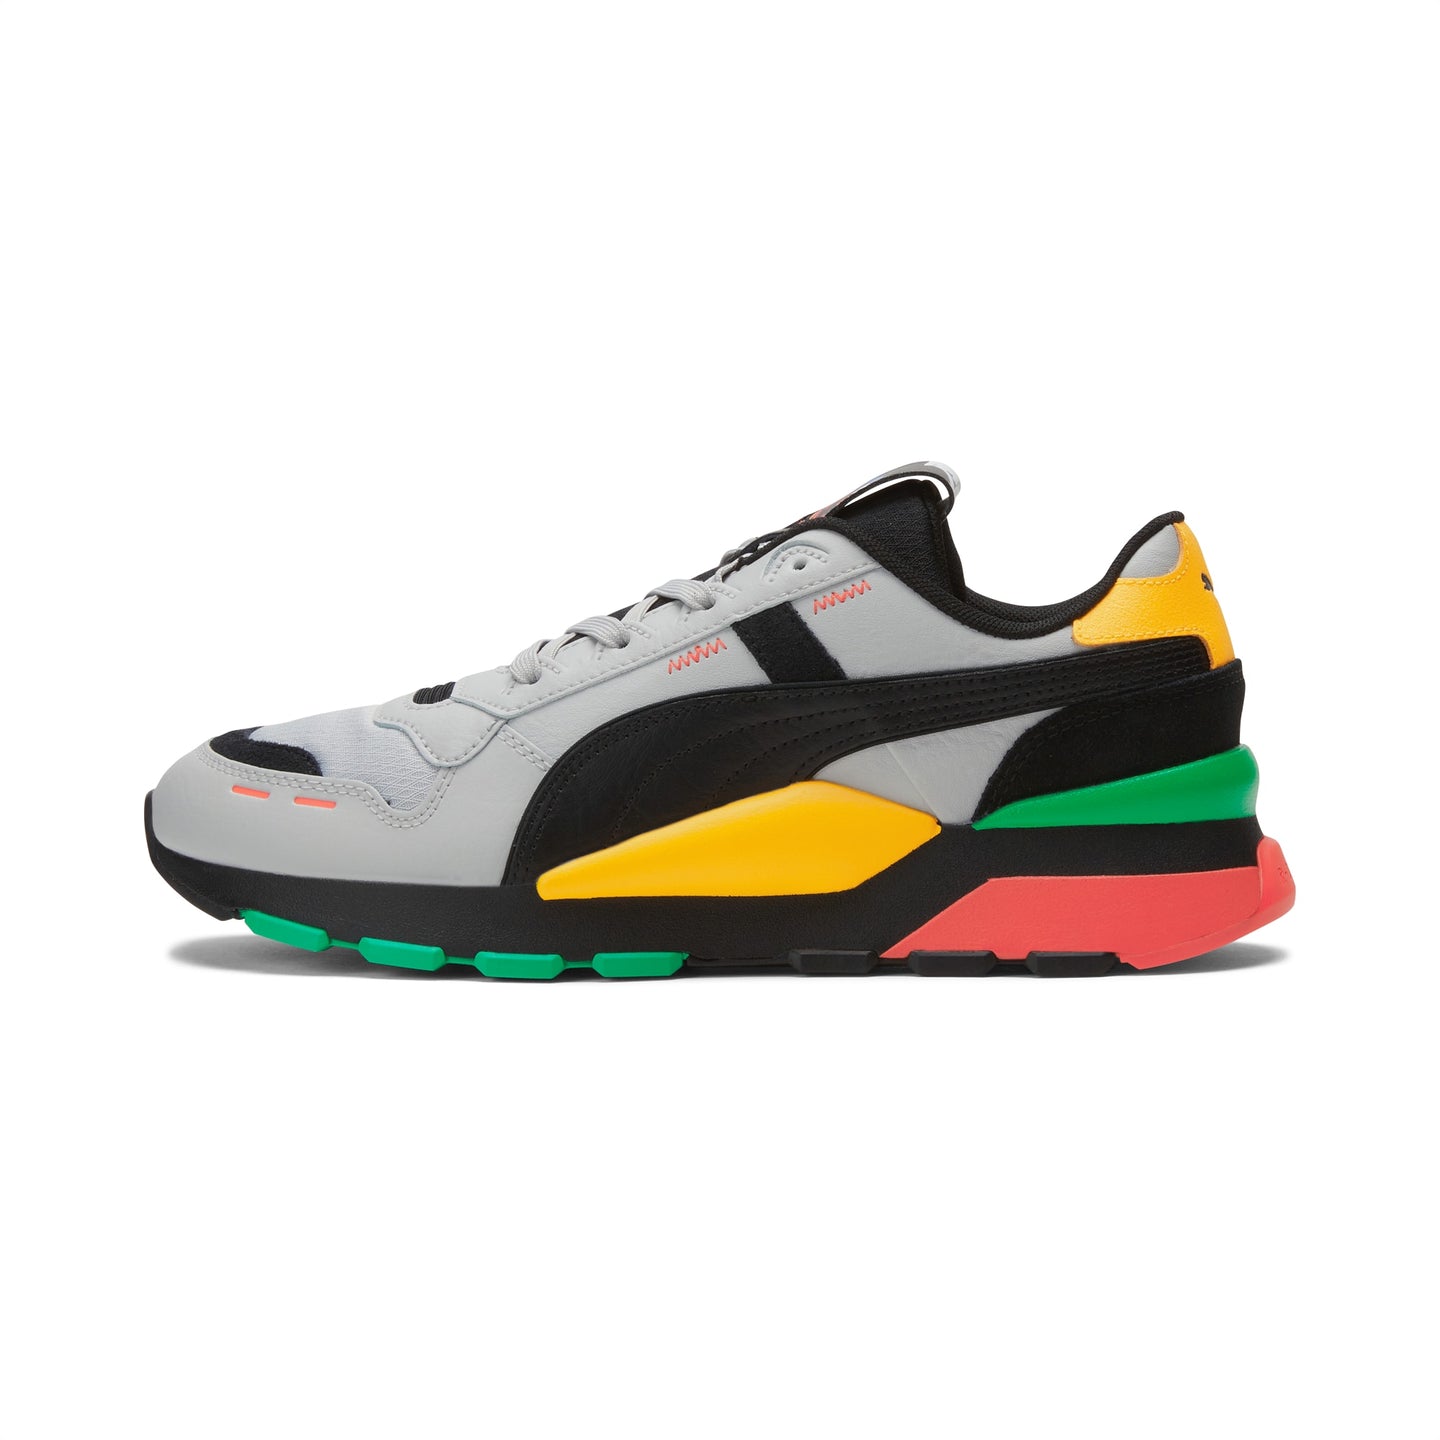 Puma RS 2.0 Block Party - Light Gray / Black / Yellow / Green / Red